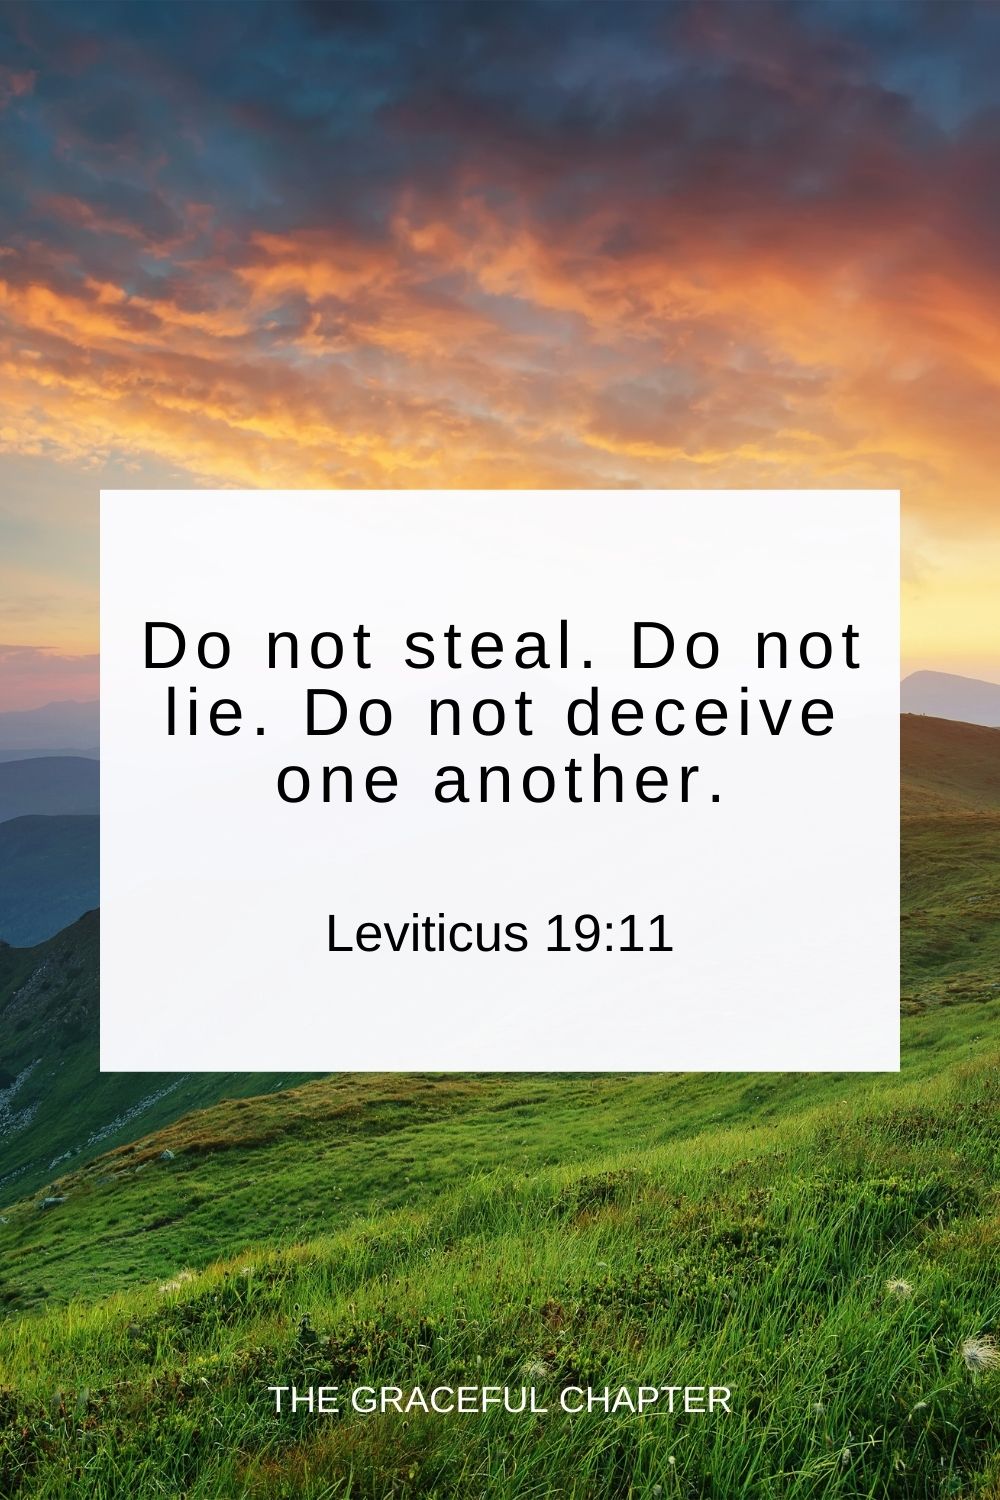 Do not steal. Do not lie. Do not deceive one another. Leviticus 19:11